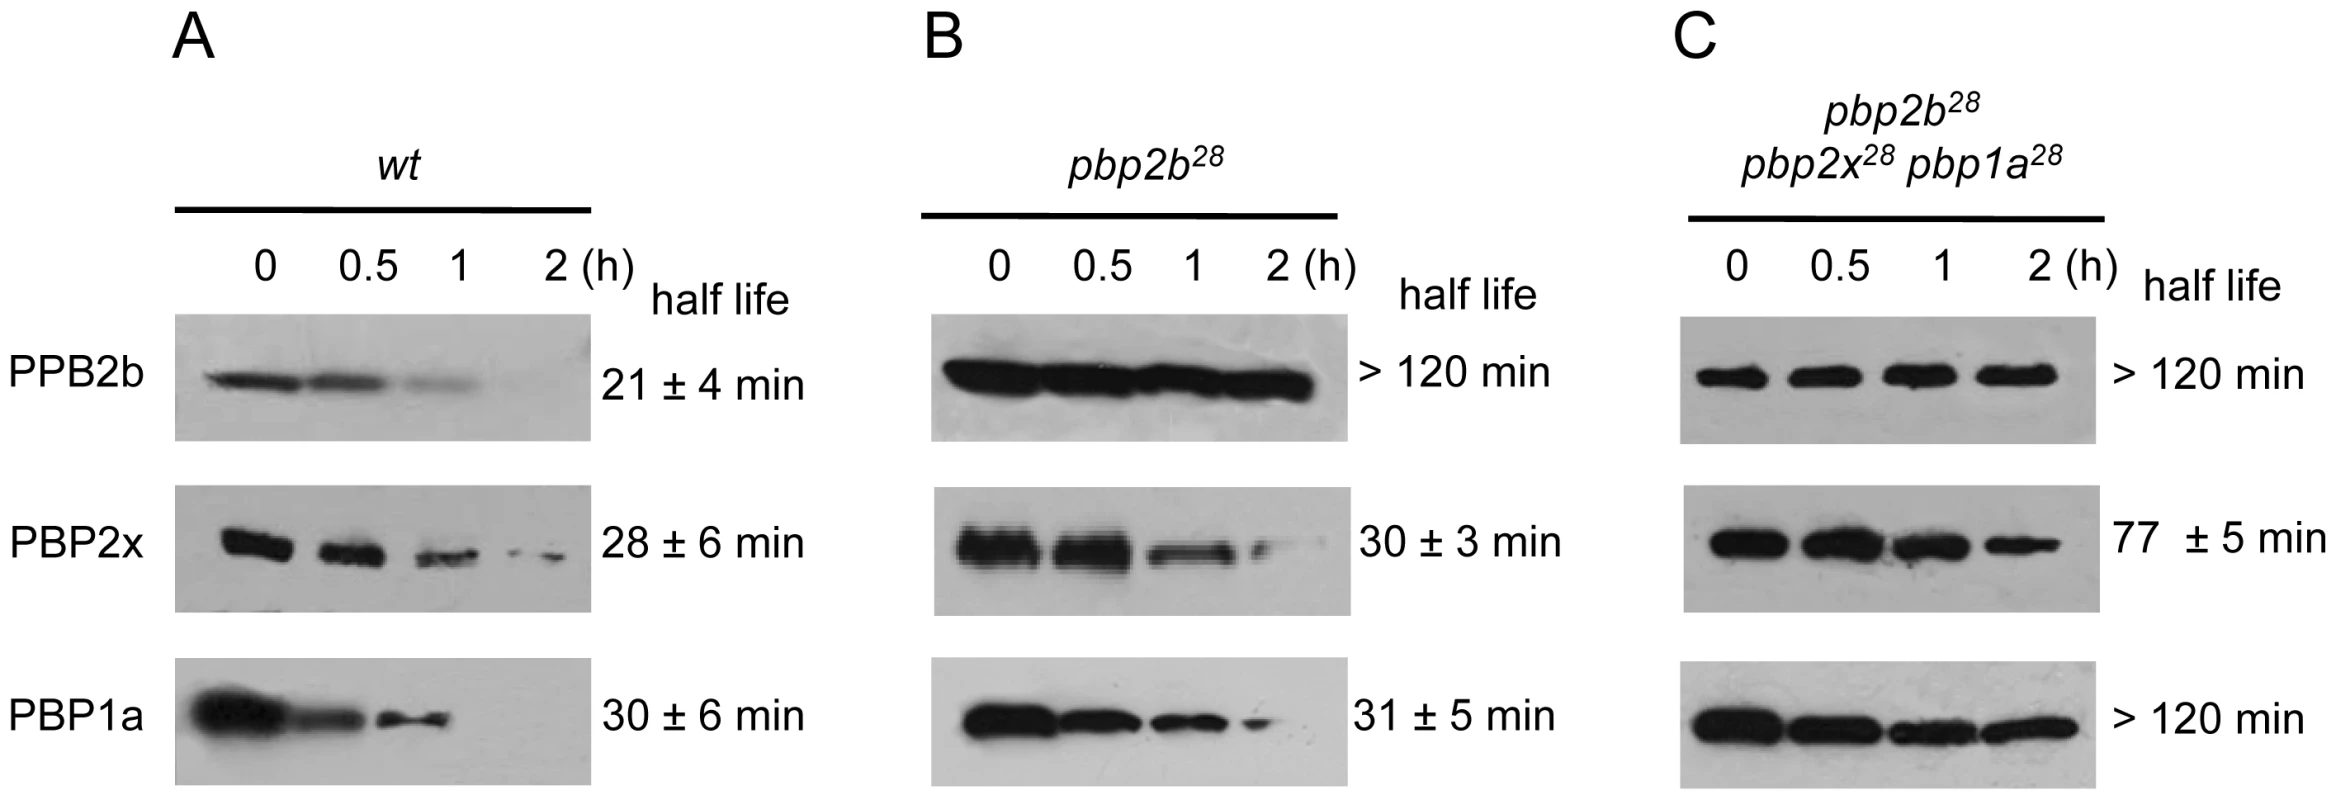 <i>S</i>tability in vivo of wild-type and mutant PBPs.